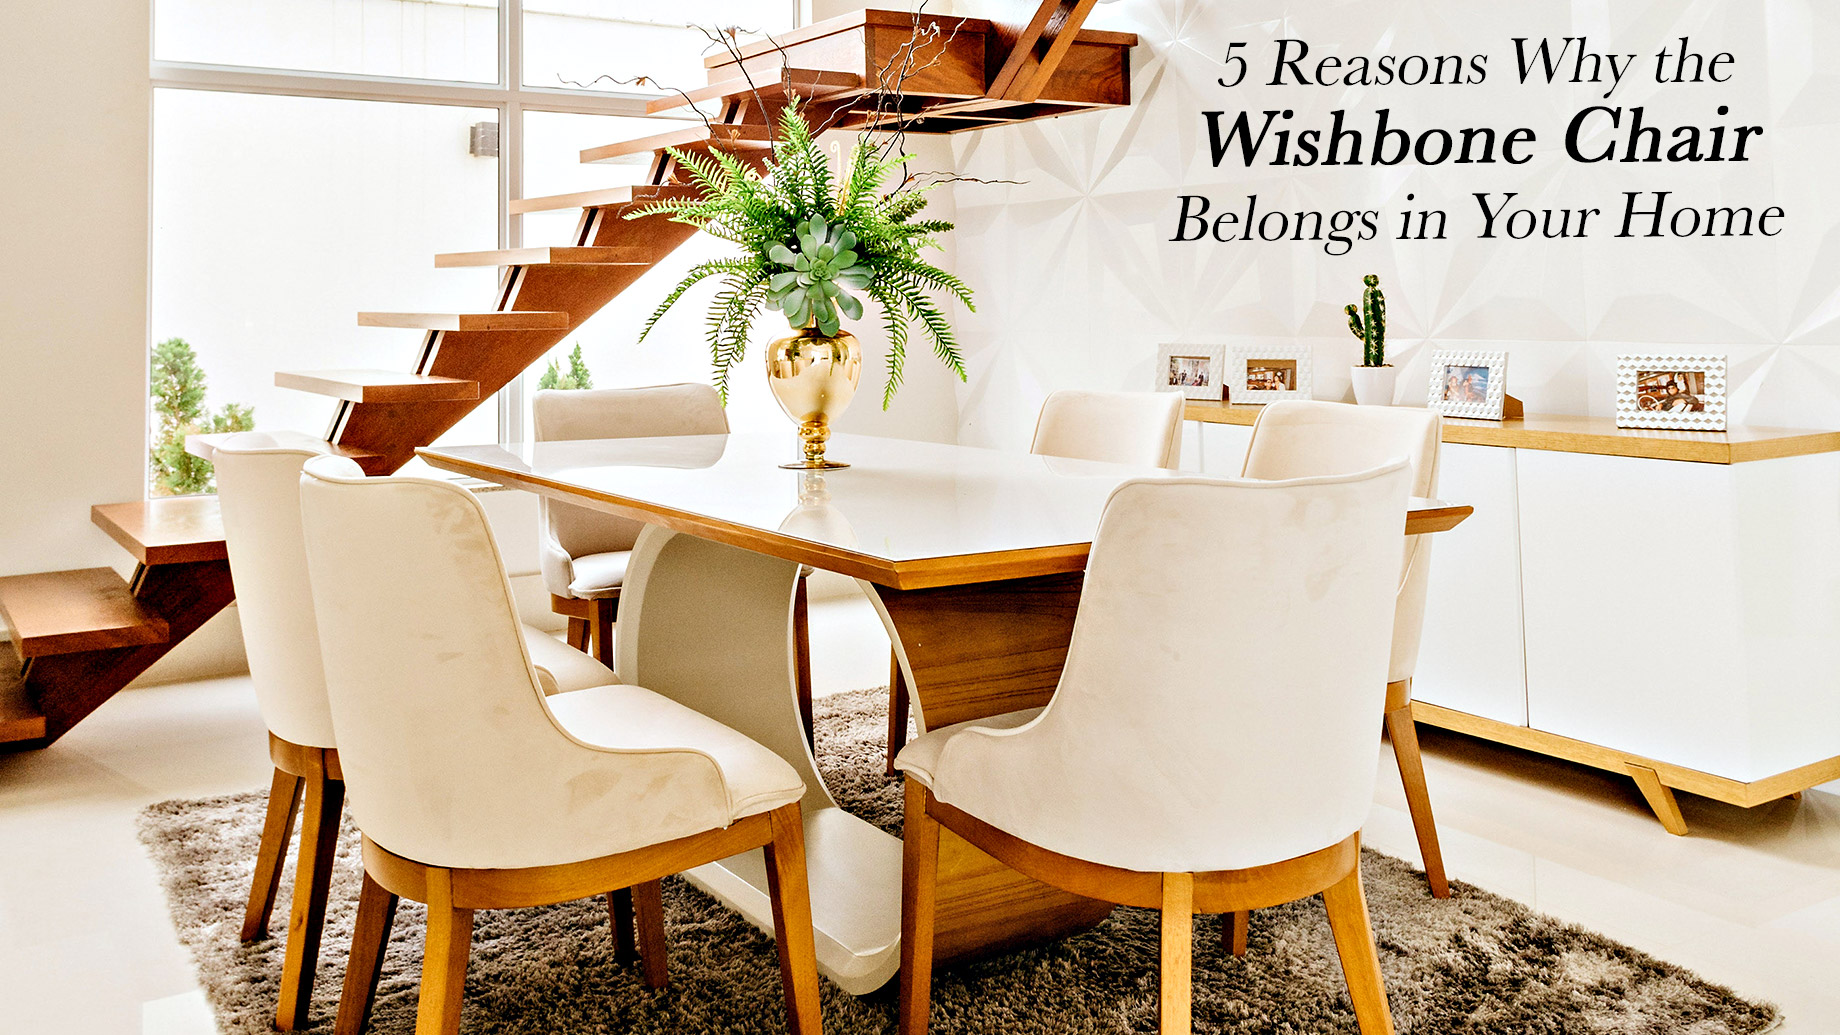 5 Reasons Why the Wishbone Chair Belongs in Your Home